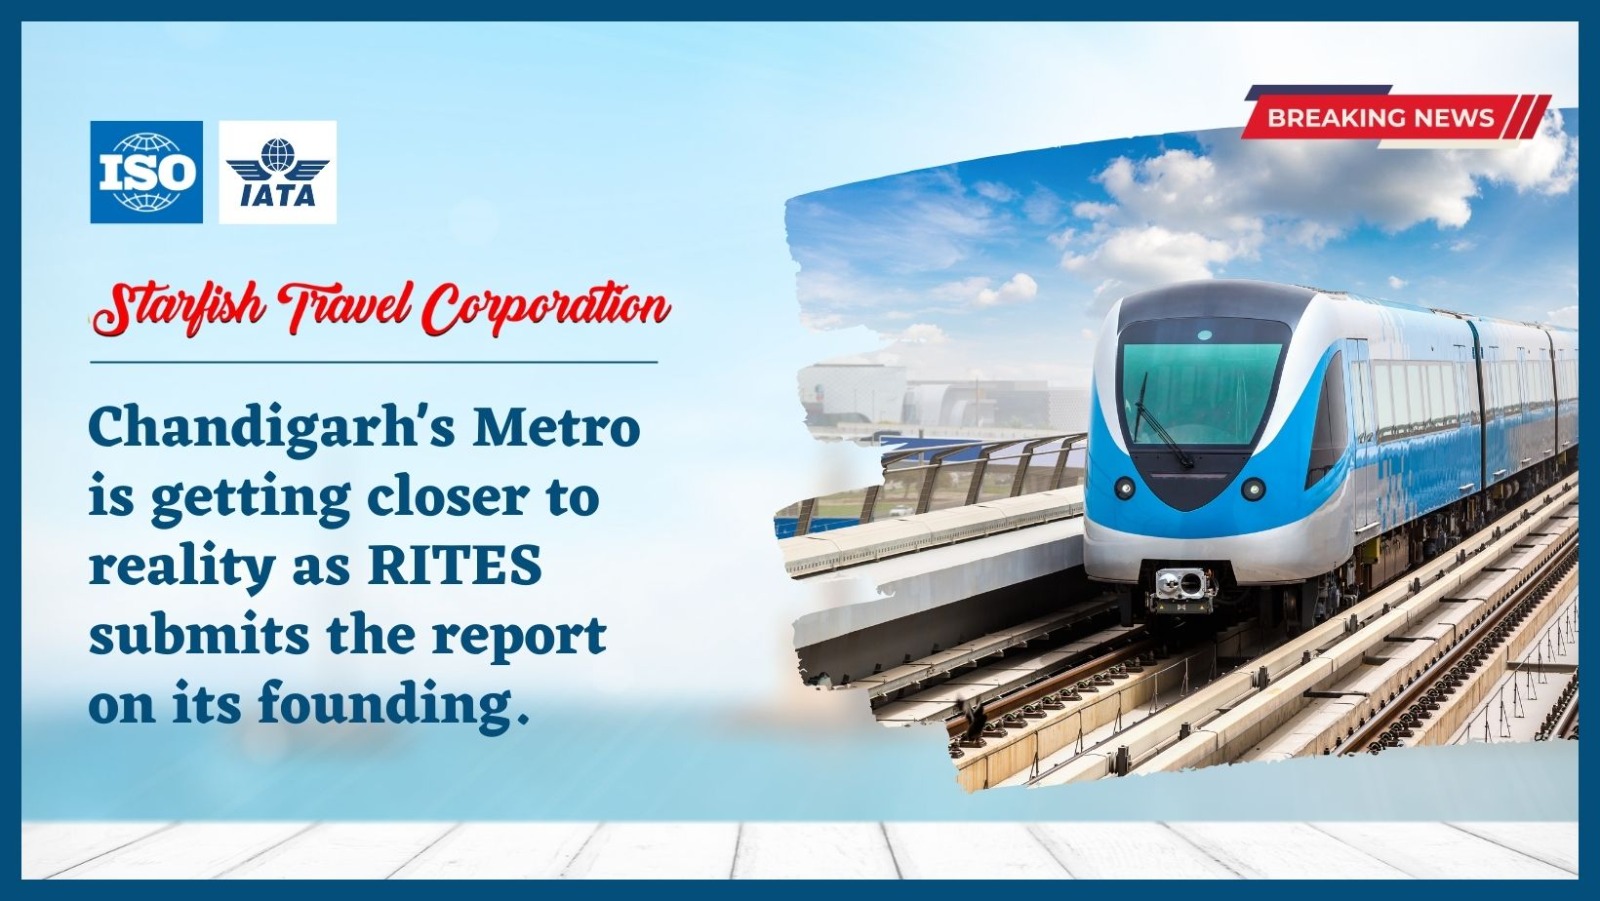 You are currently viewing Chandigarh’s Metro is getting closer to reality as RITES submits the report on its founding.